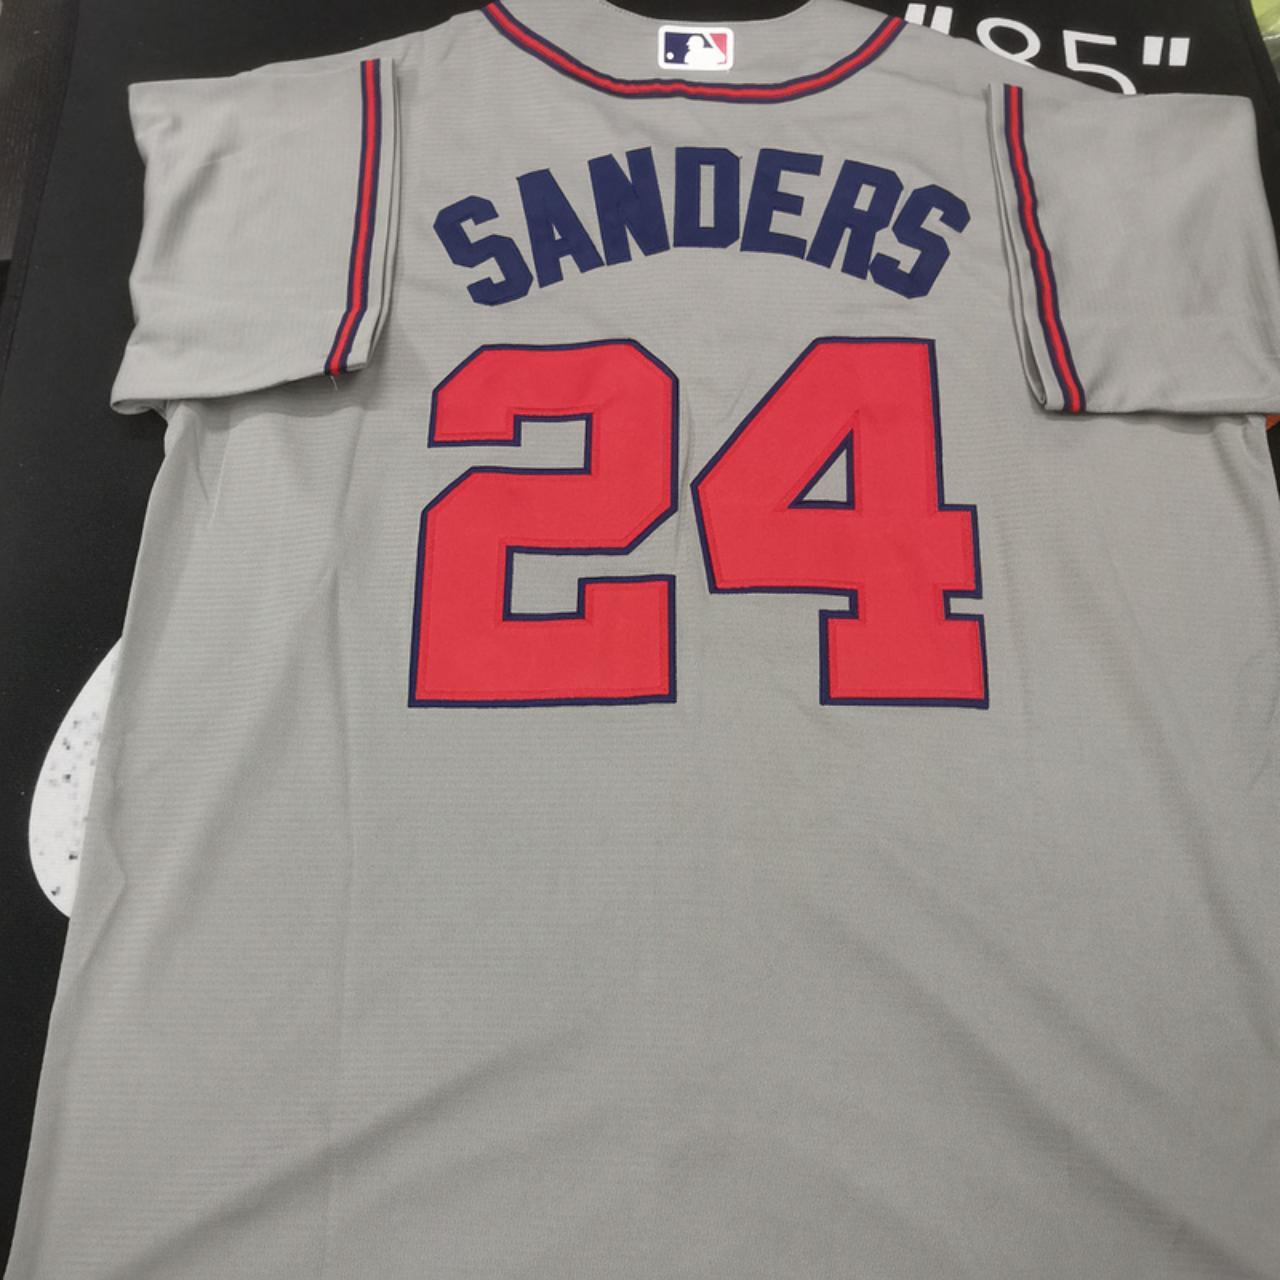 Made in USA Deion Sanders Braves Jersey with tags - Depop